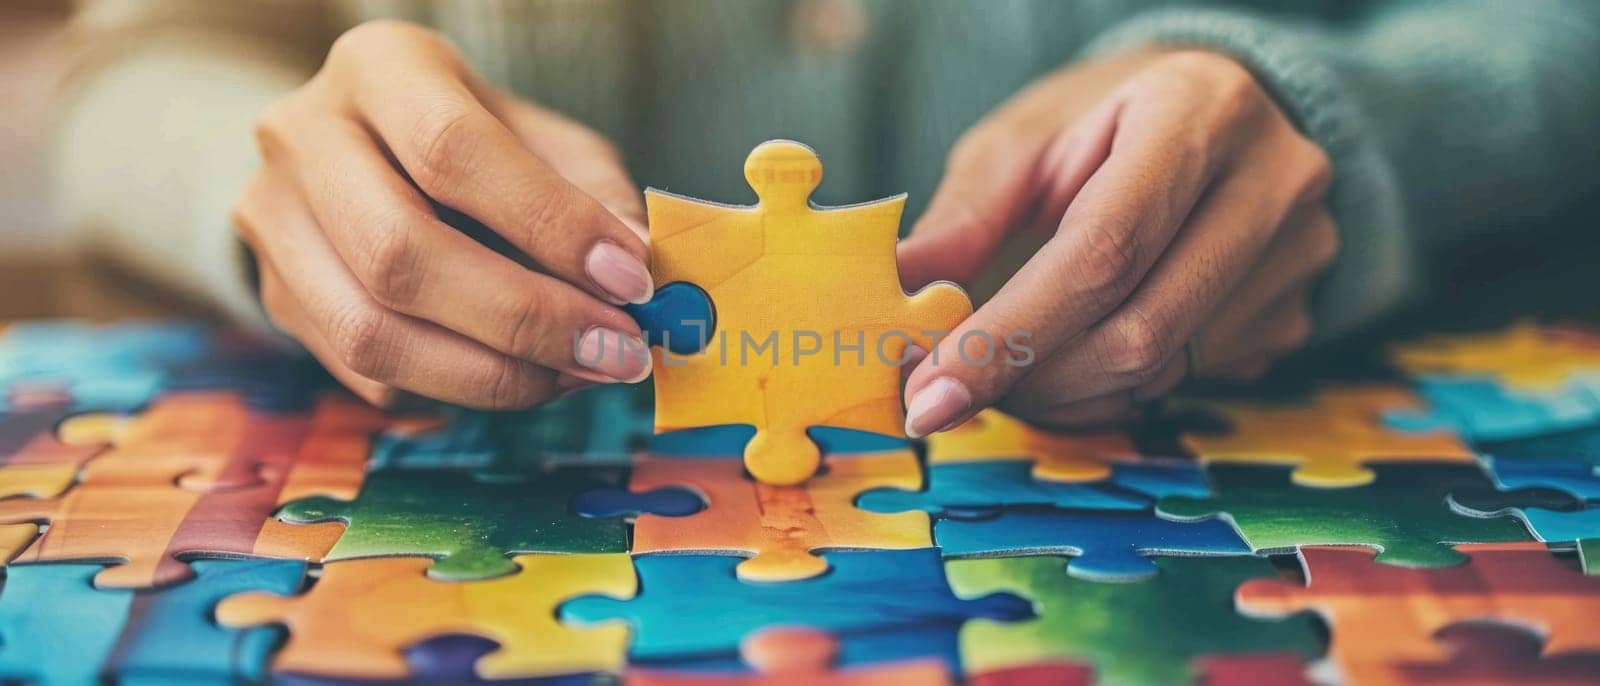 A person is holding a puzzle piece in their hand by AI generated image.